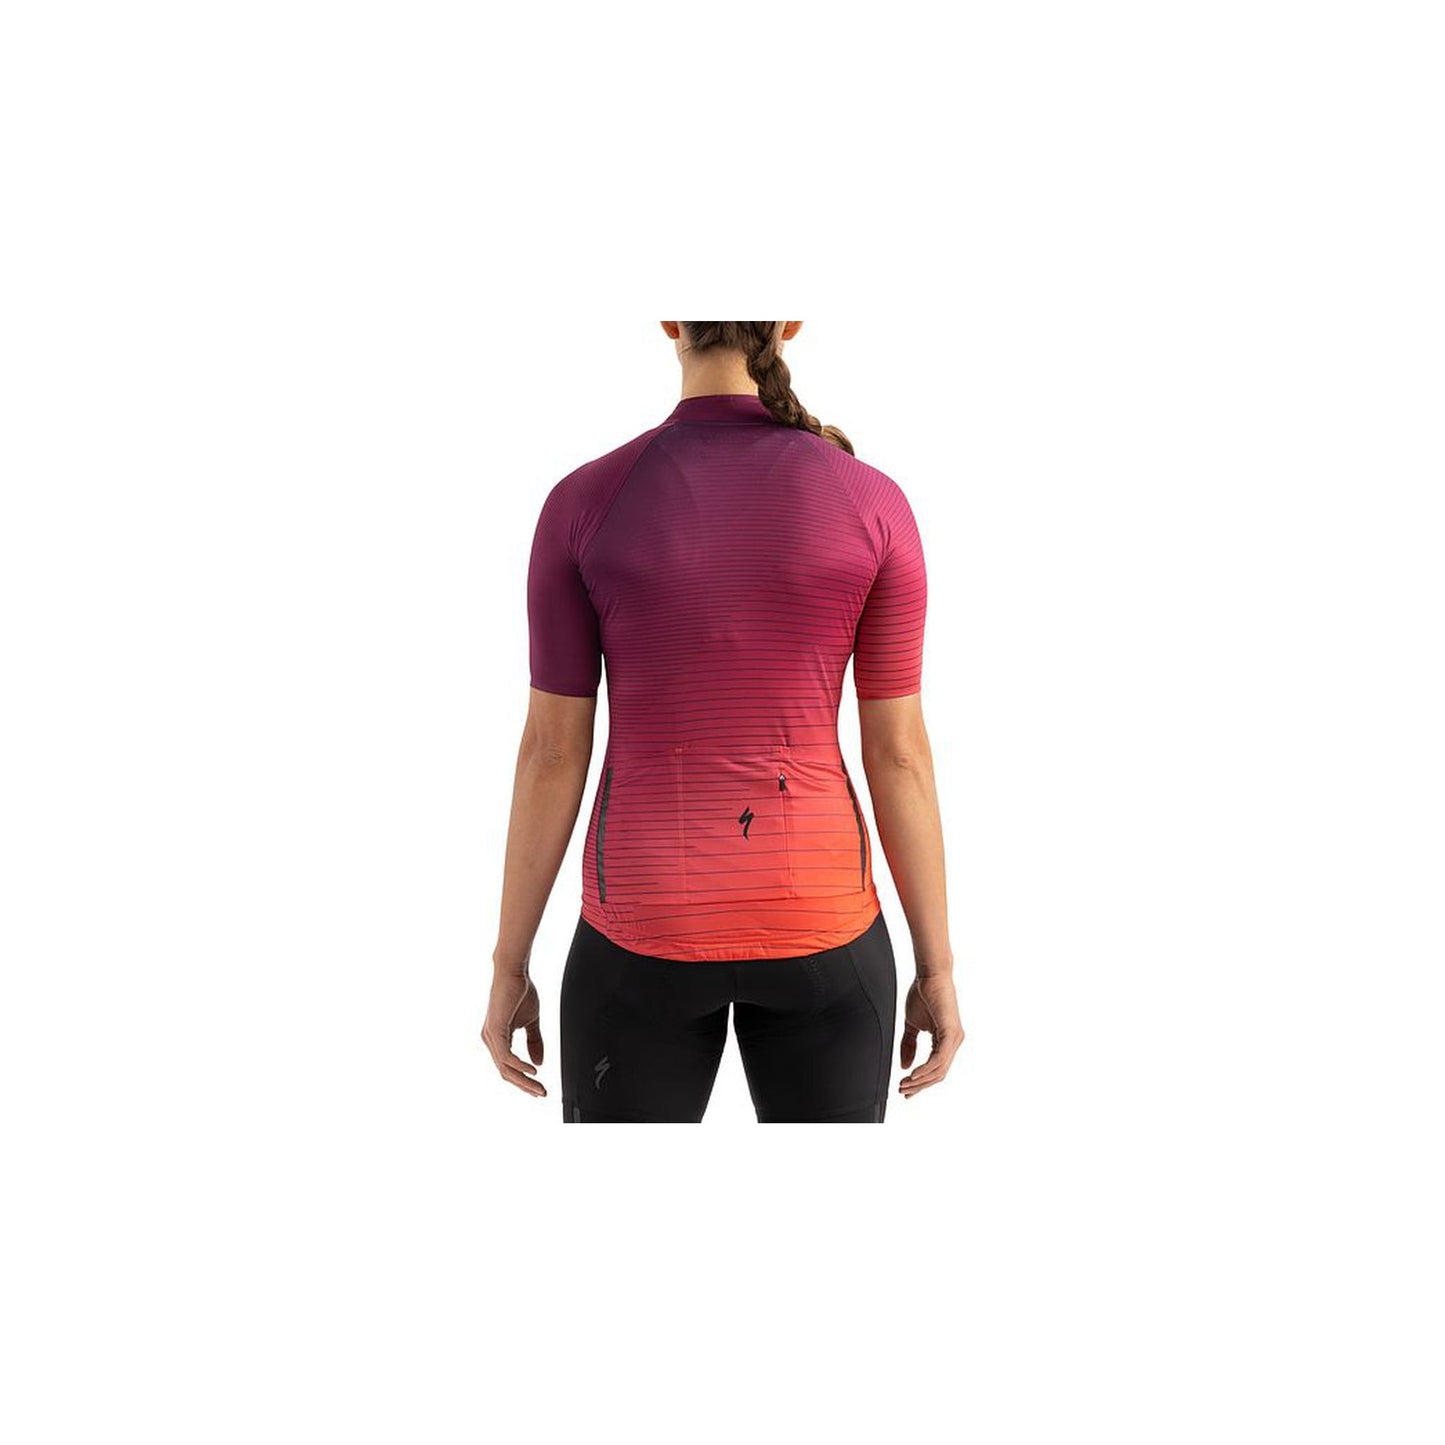 Women's SL Air Jersey-Cycles Direct Specialized